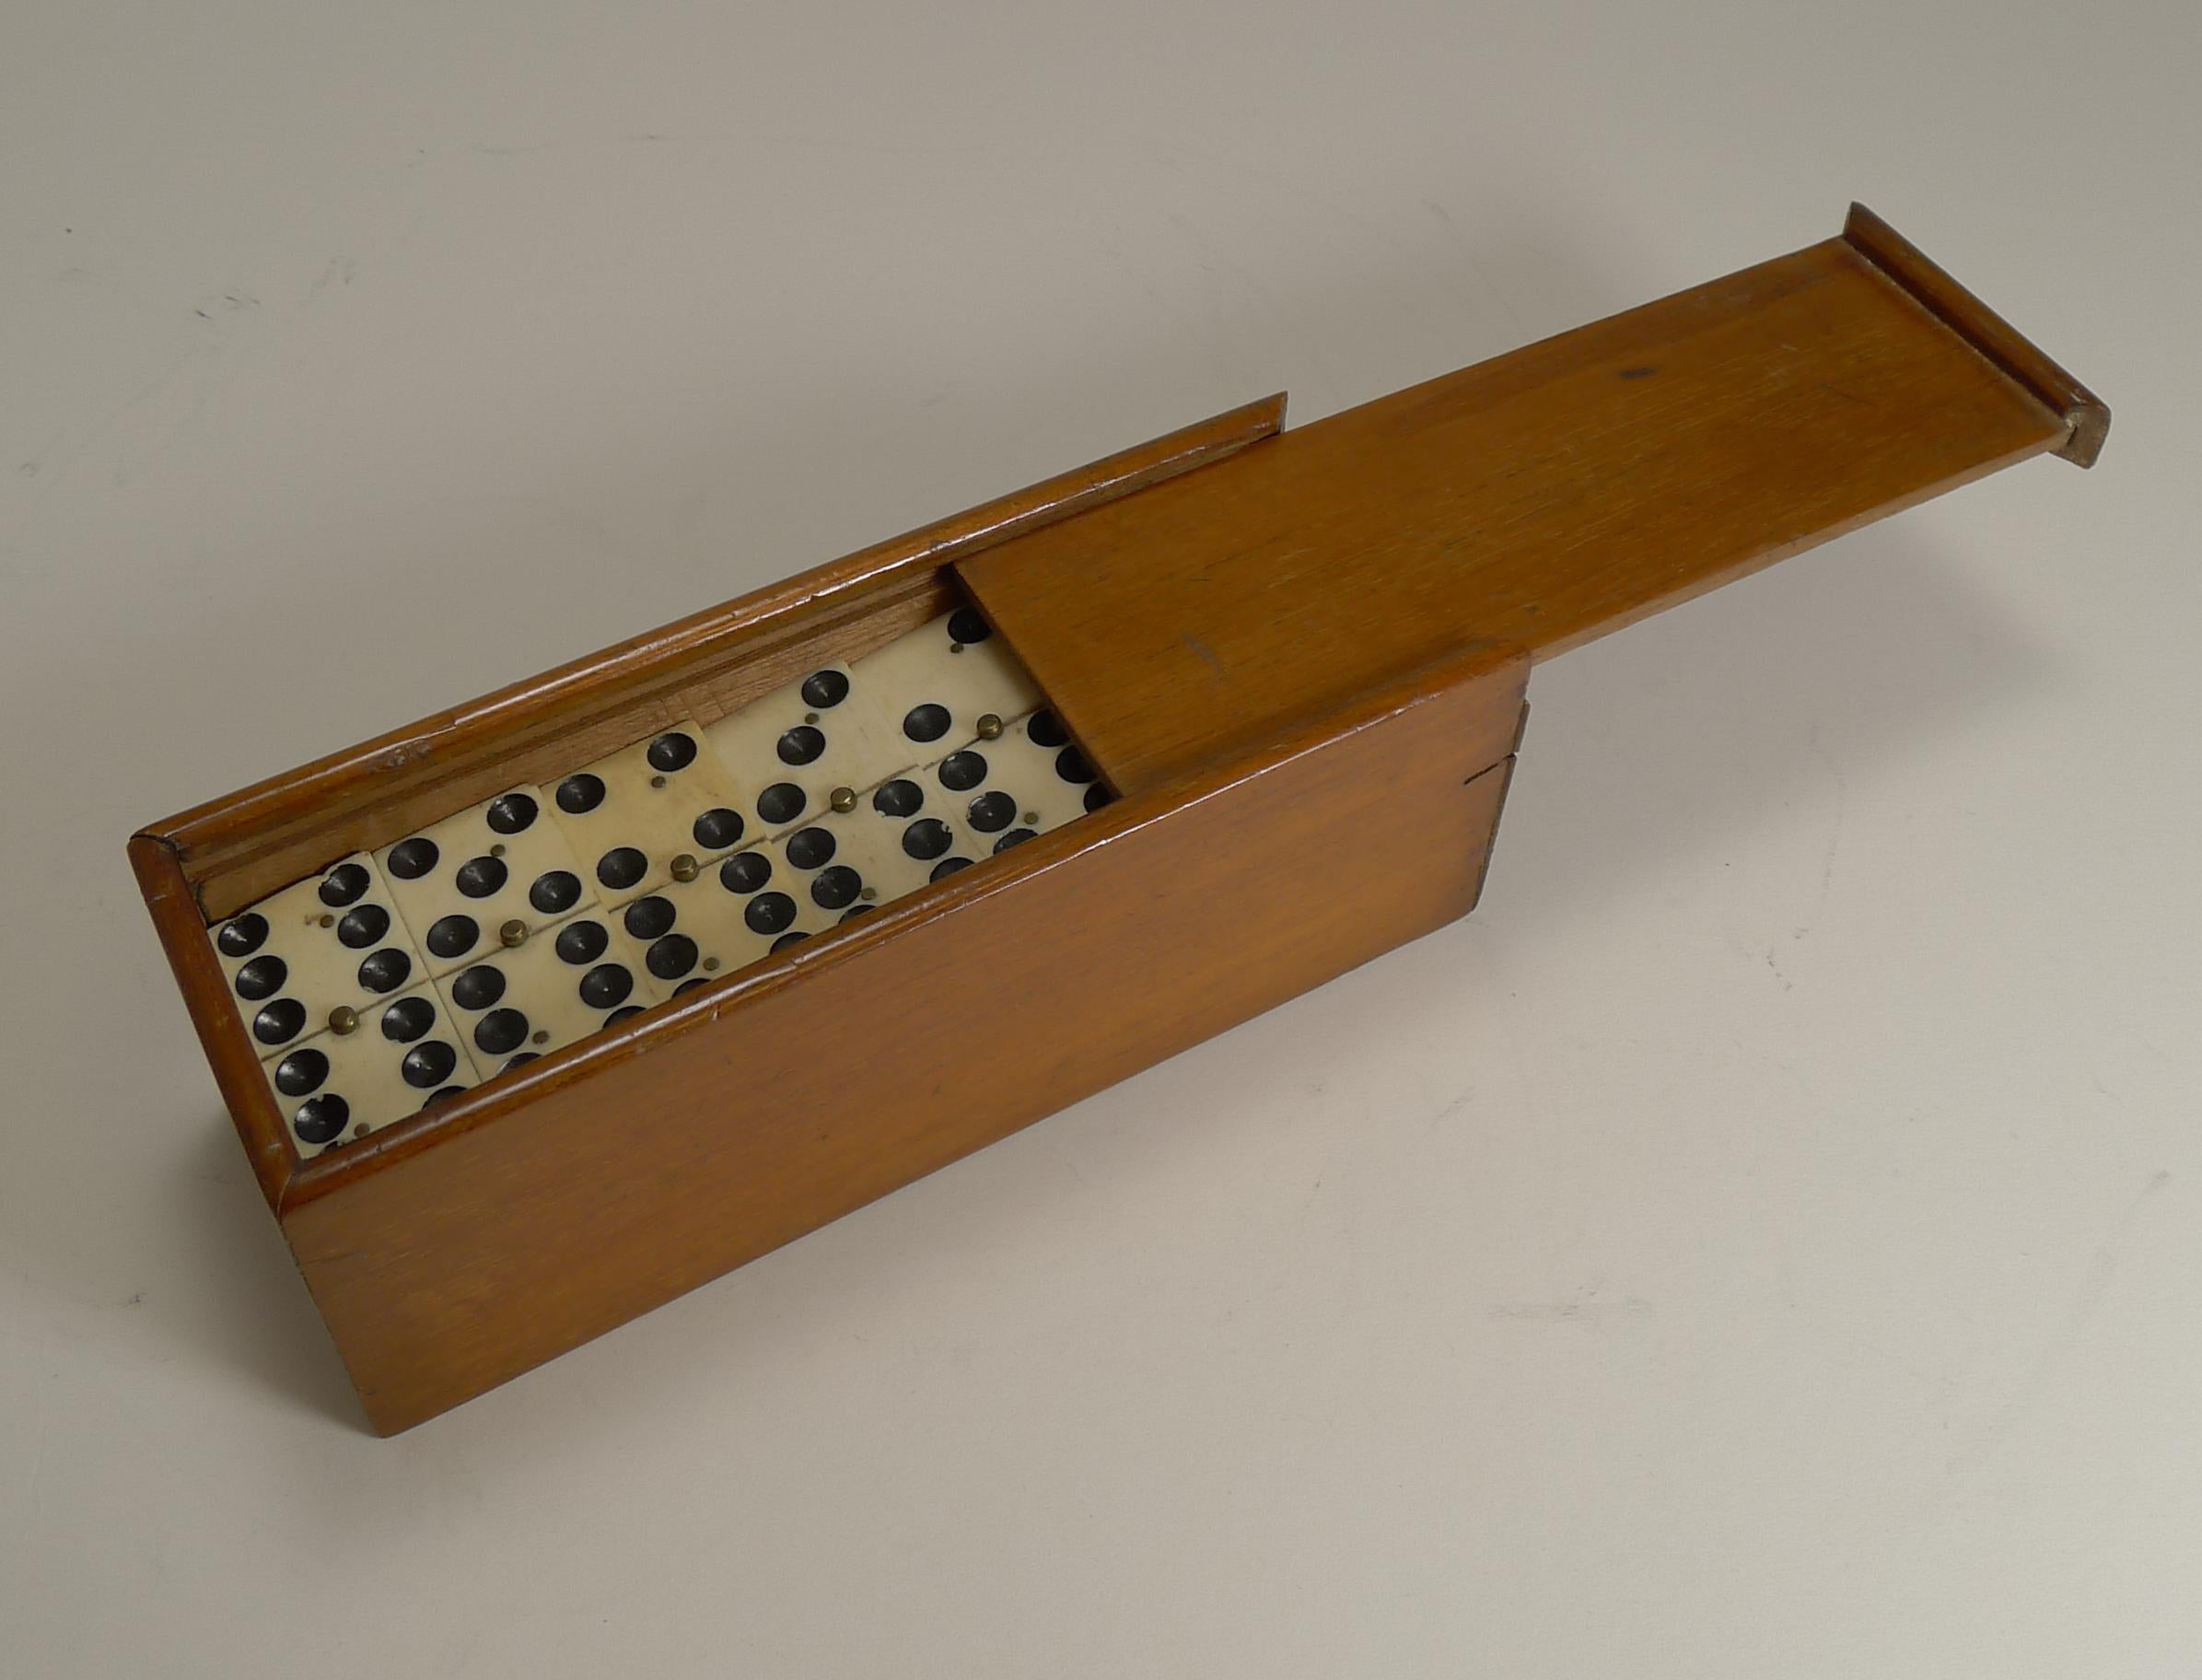 A charming set of late Edwardian dominoes or dominos, all in good condition with a handsome polished wooden storage box with a sliding lid.

The bone and ebony pinned together with small brass pins. The box measures 6 5/8